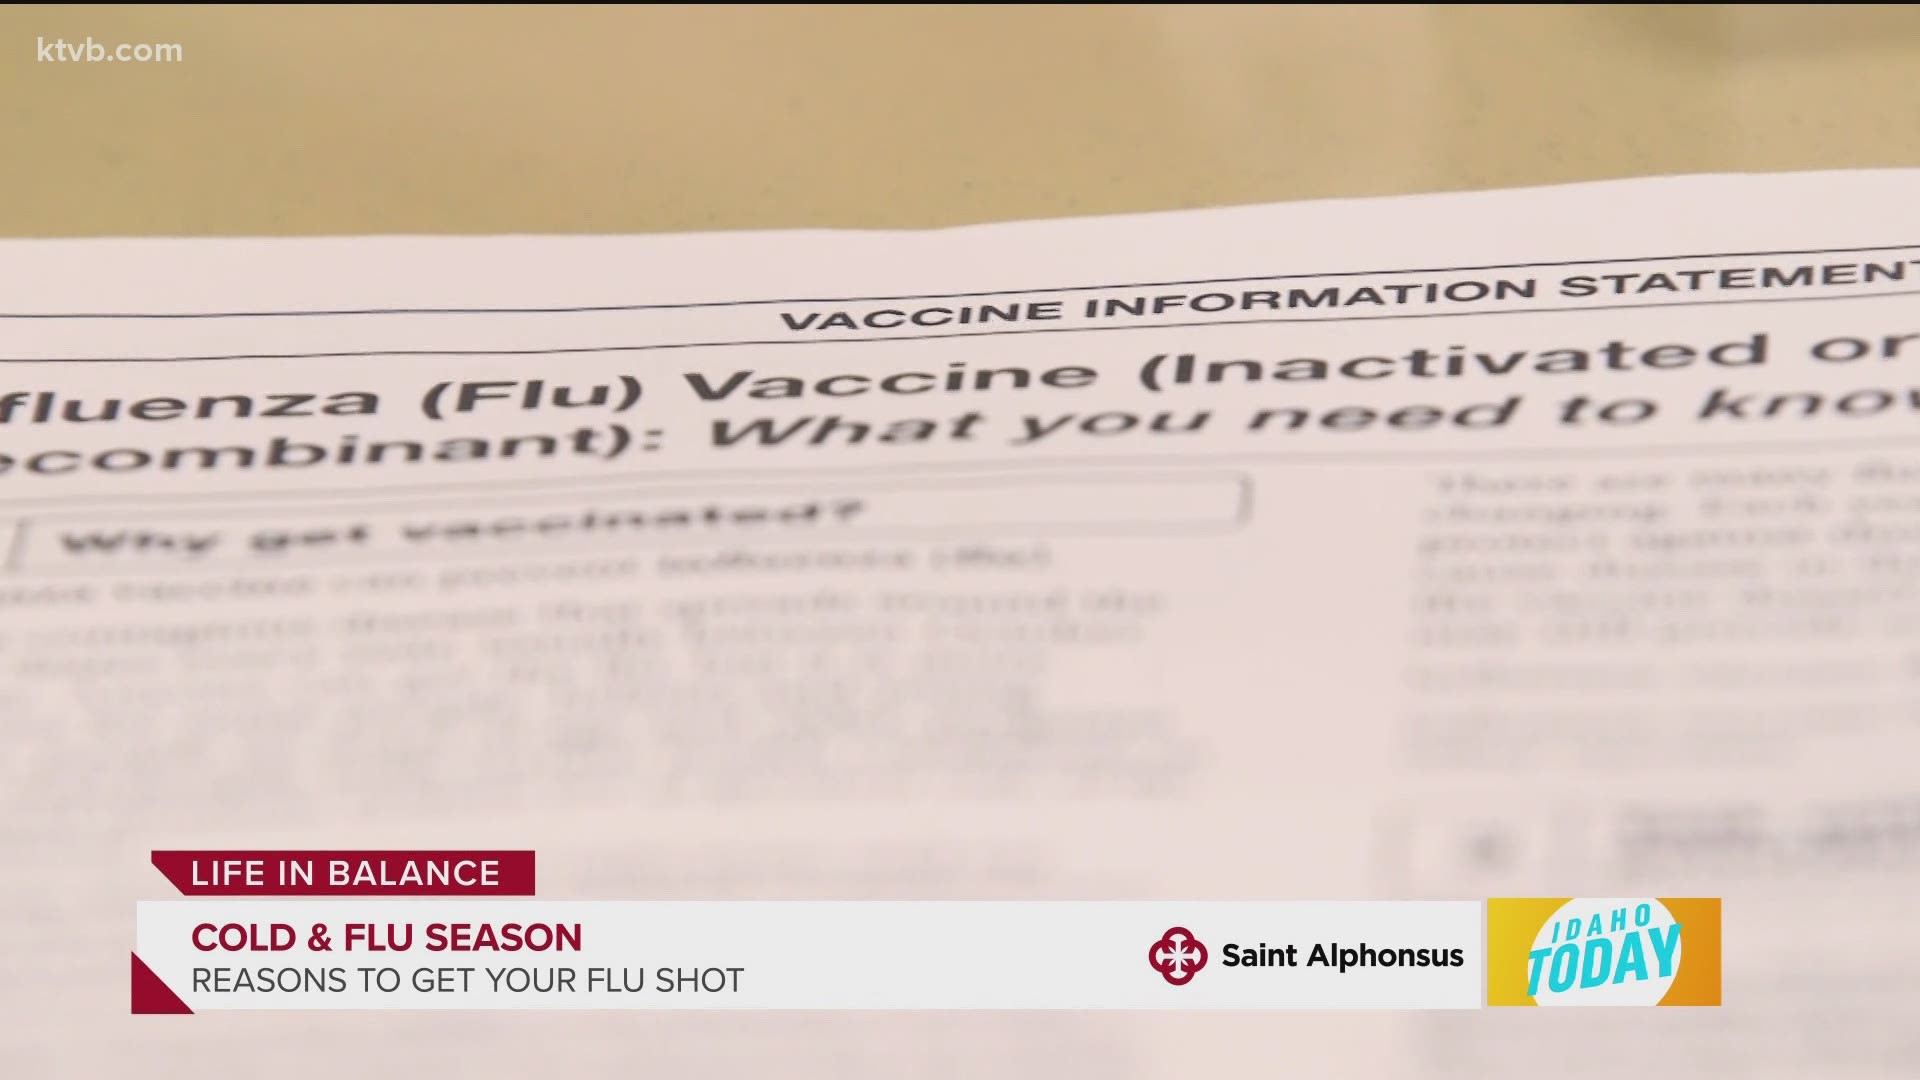 Dr Erika Aragona with Saint Alphonsus explains why preventing the flu this season is important, and how to tell the difference between a cold/flu and Covid-19.